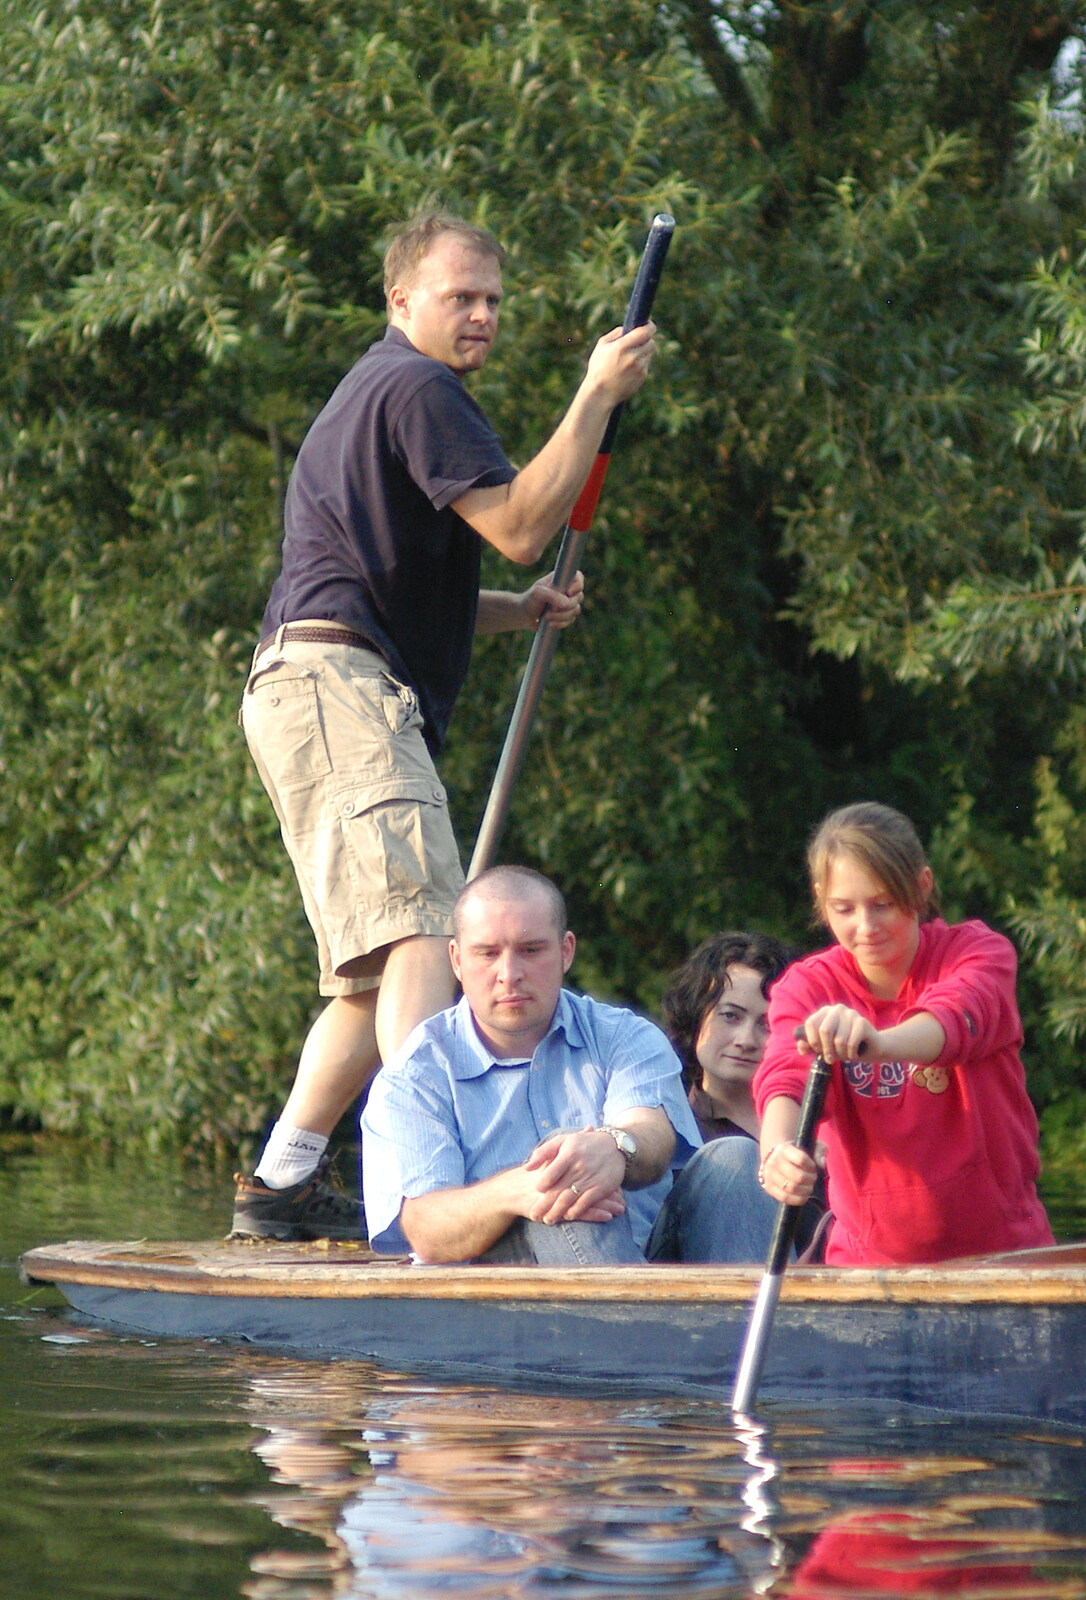 There's a look of concentration on Nick's face from Qualcomm goes Punting on the Cam, Grantchester Meadows, Cambridge - 18th August 2005